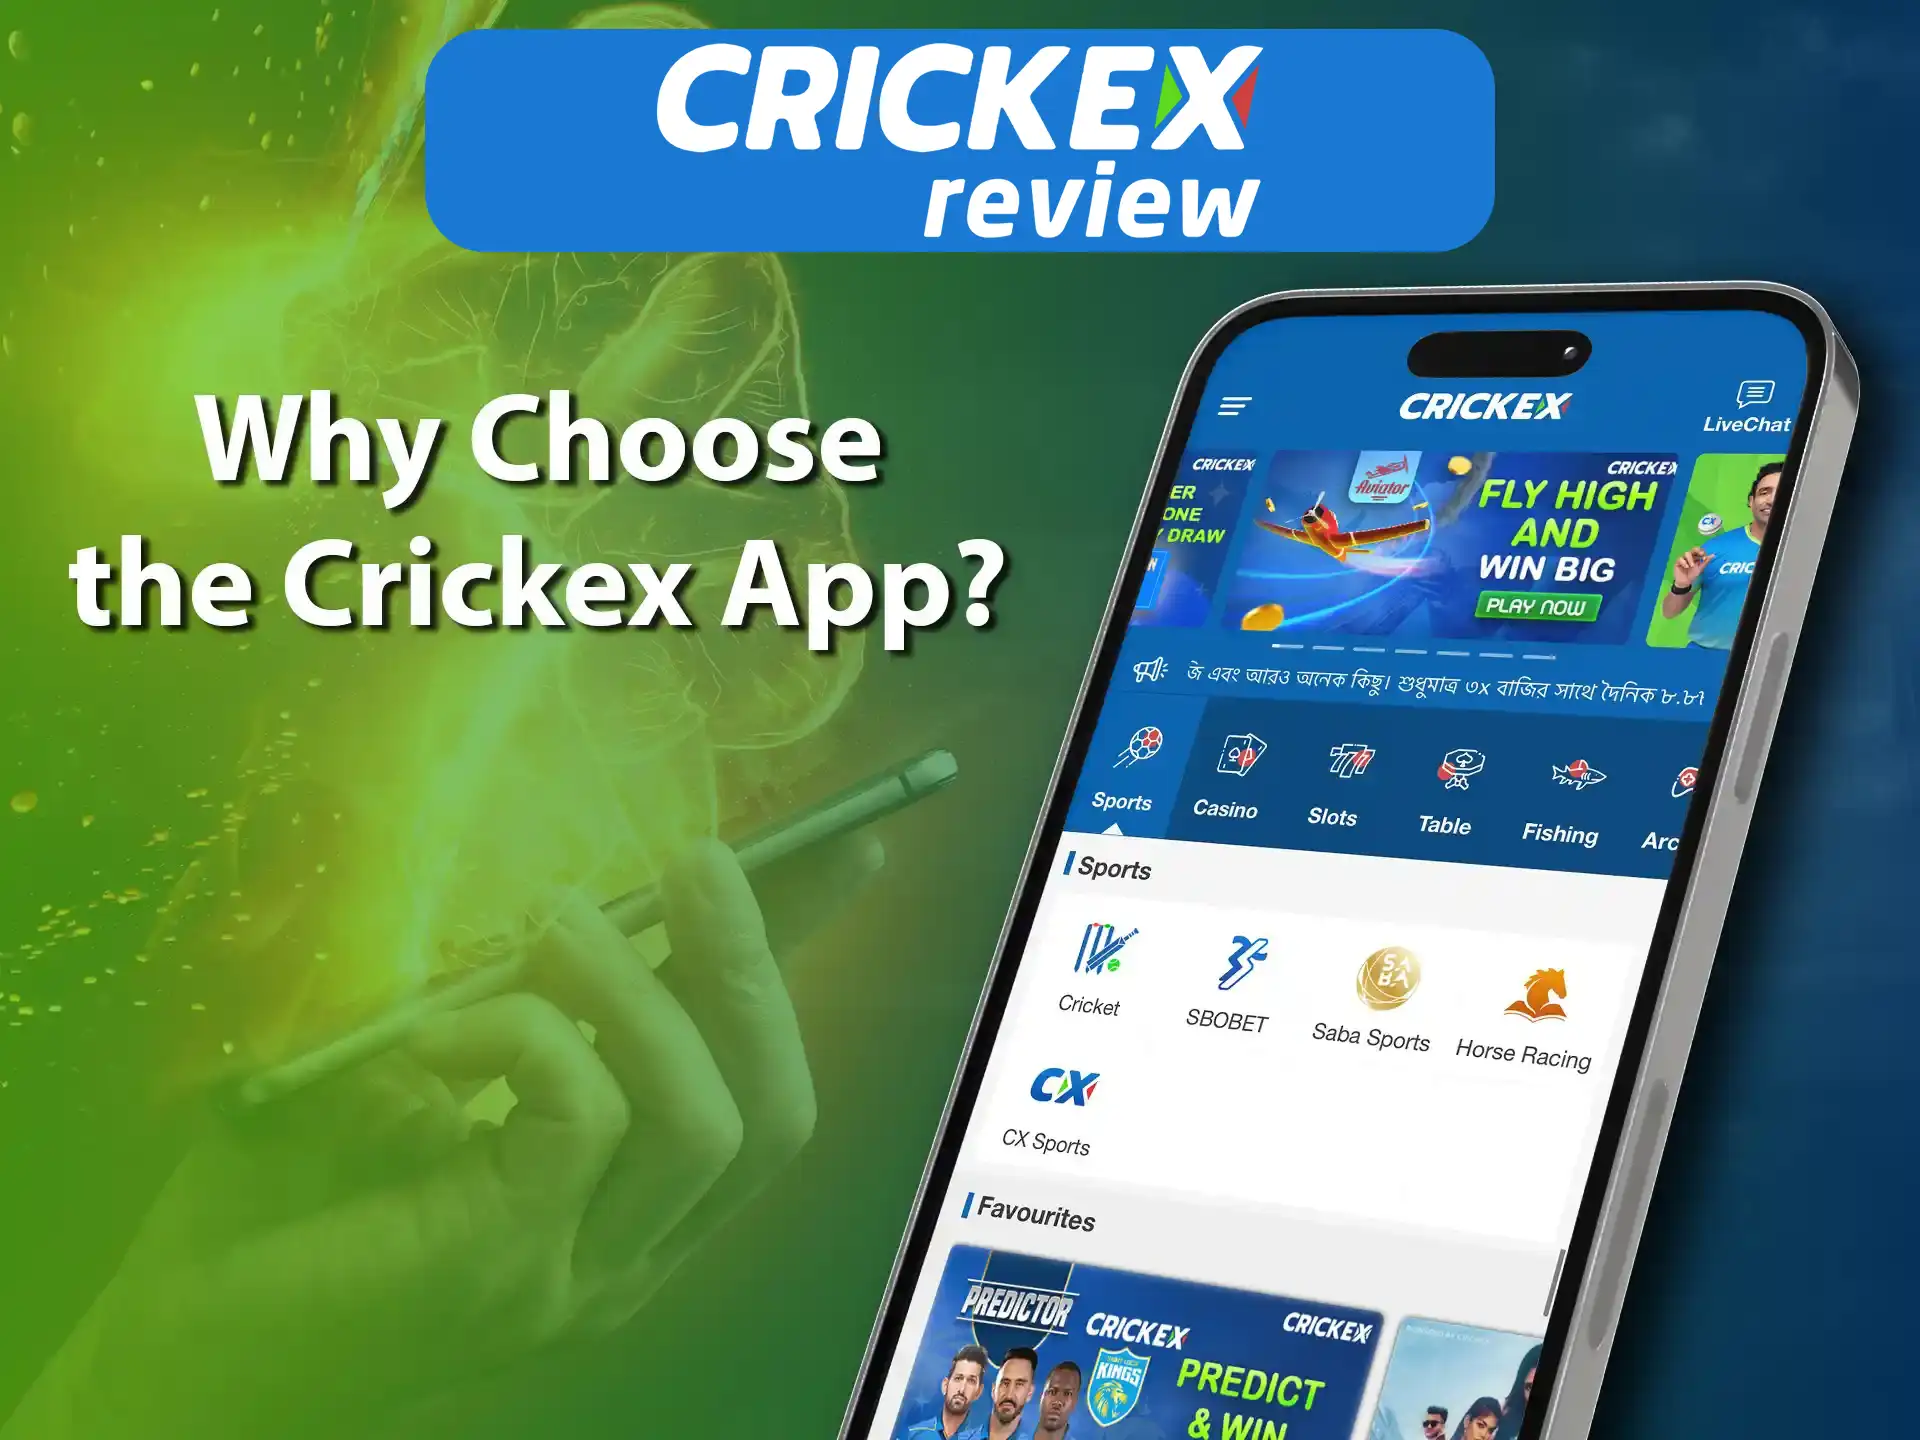 Choose the Crickex app and enjoy a variety of content and a wide range of sporting events.